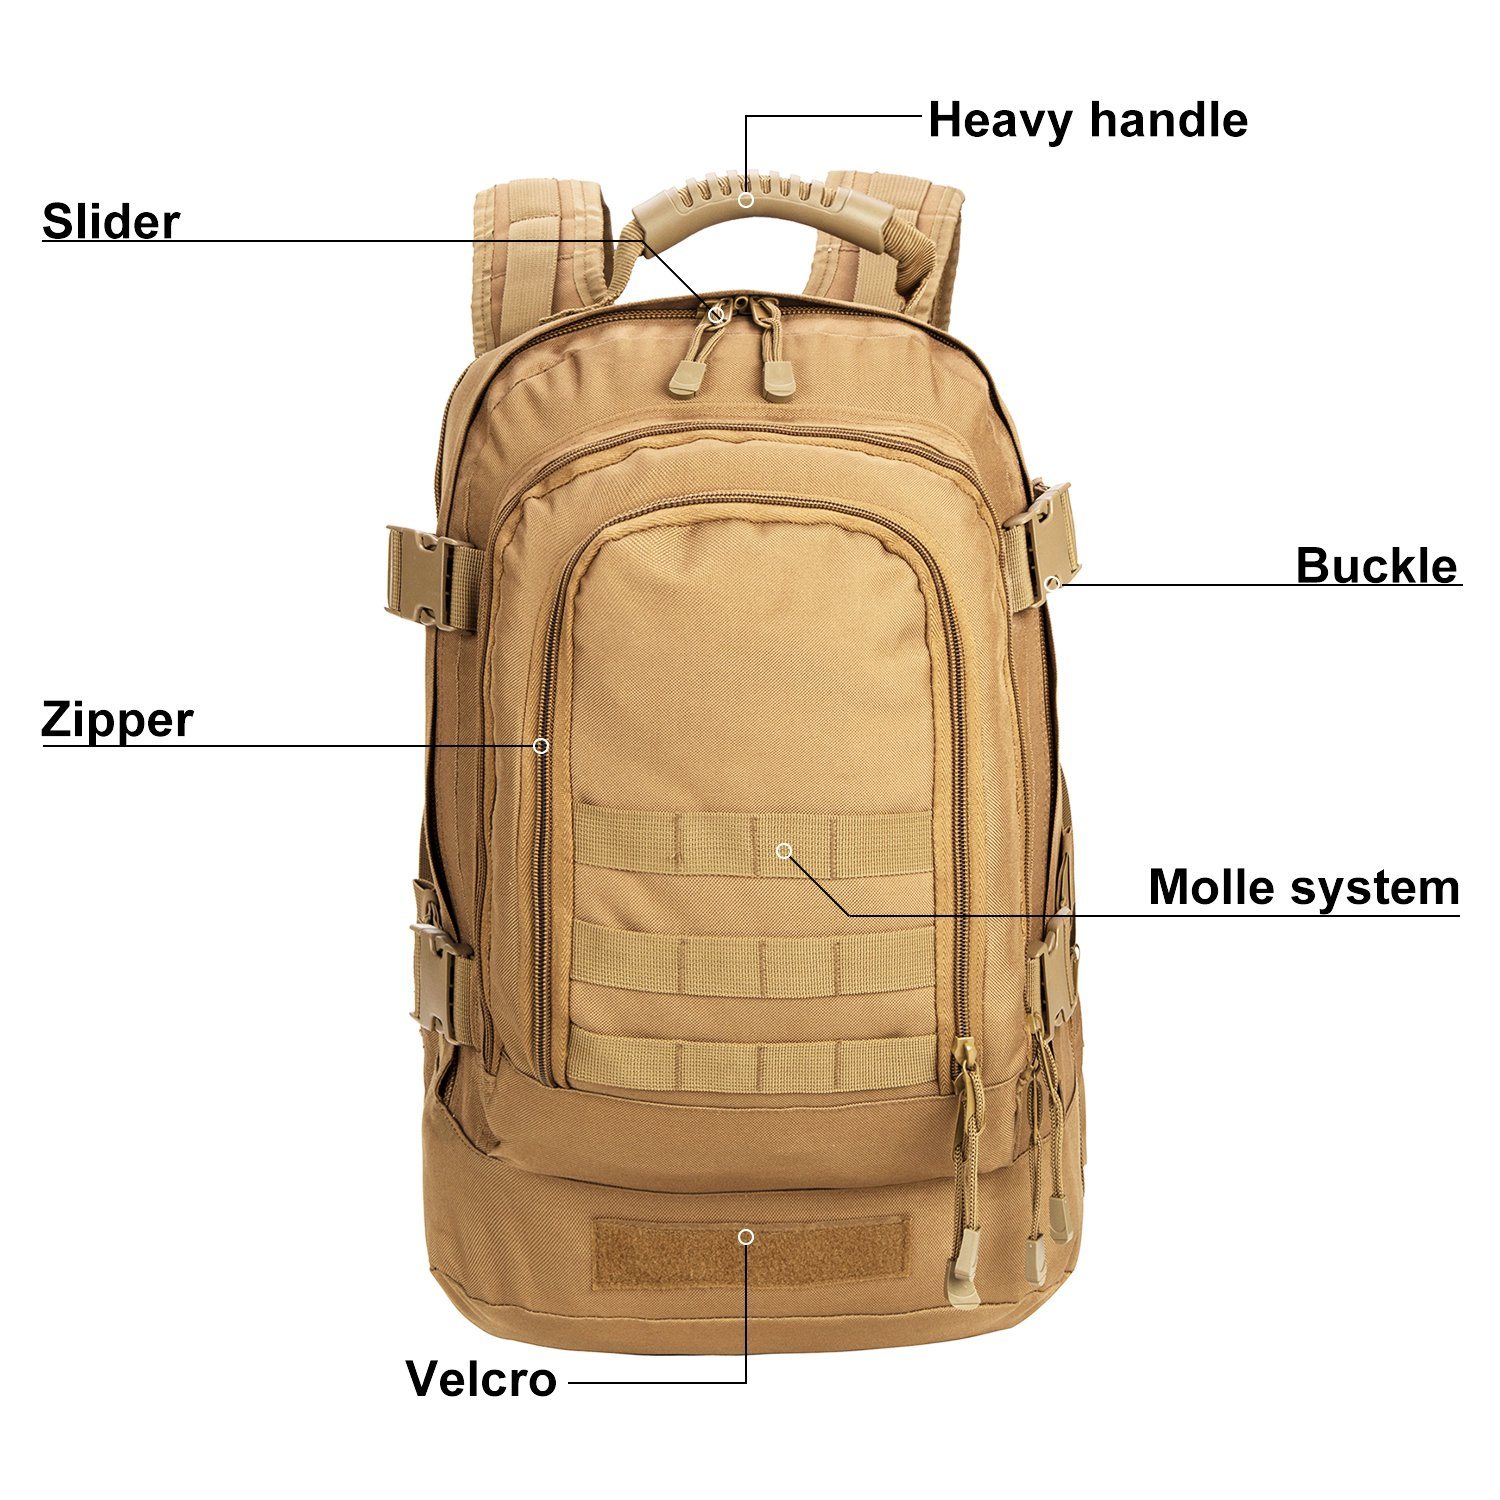 Hot Selling Military Tactical Large Capacity USB Backpack for Outdoor Sports Camping